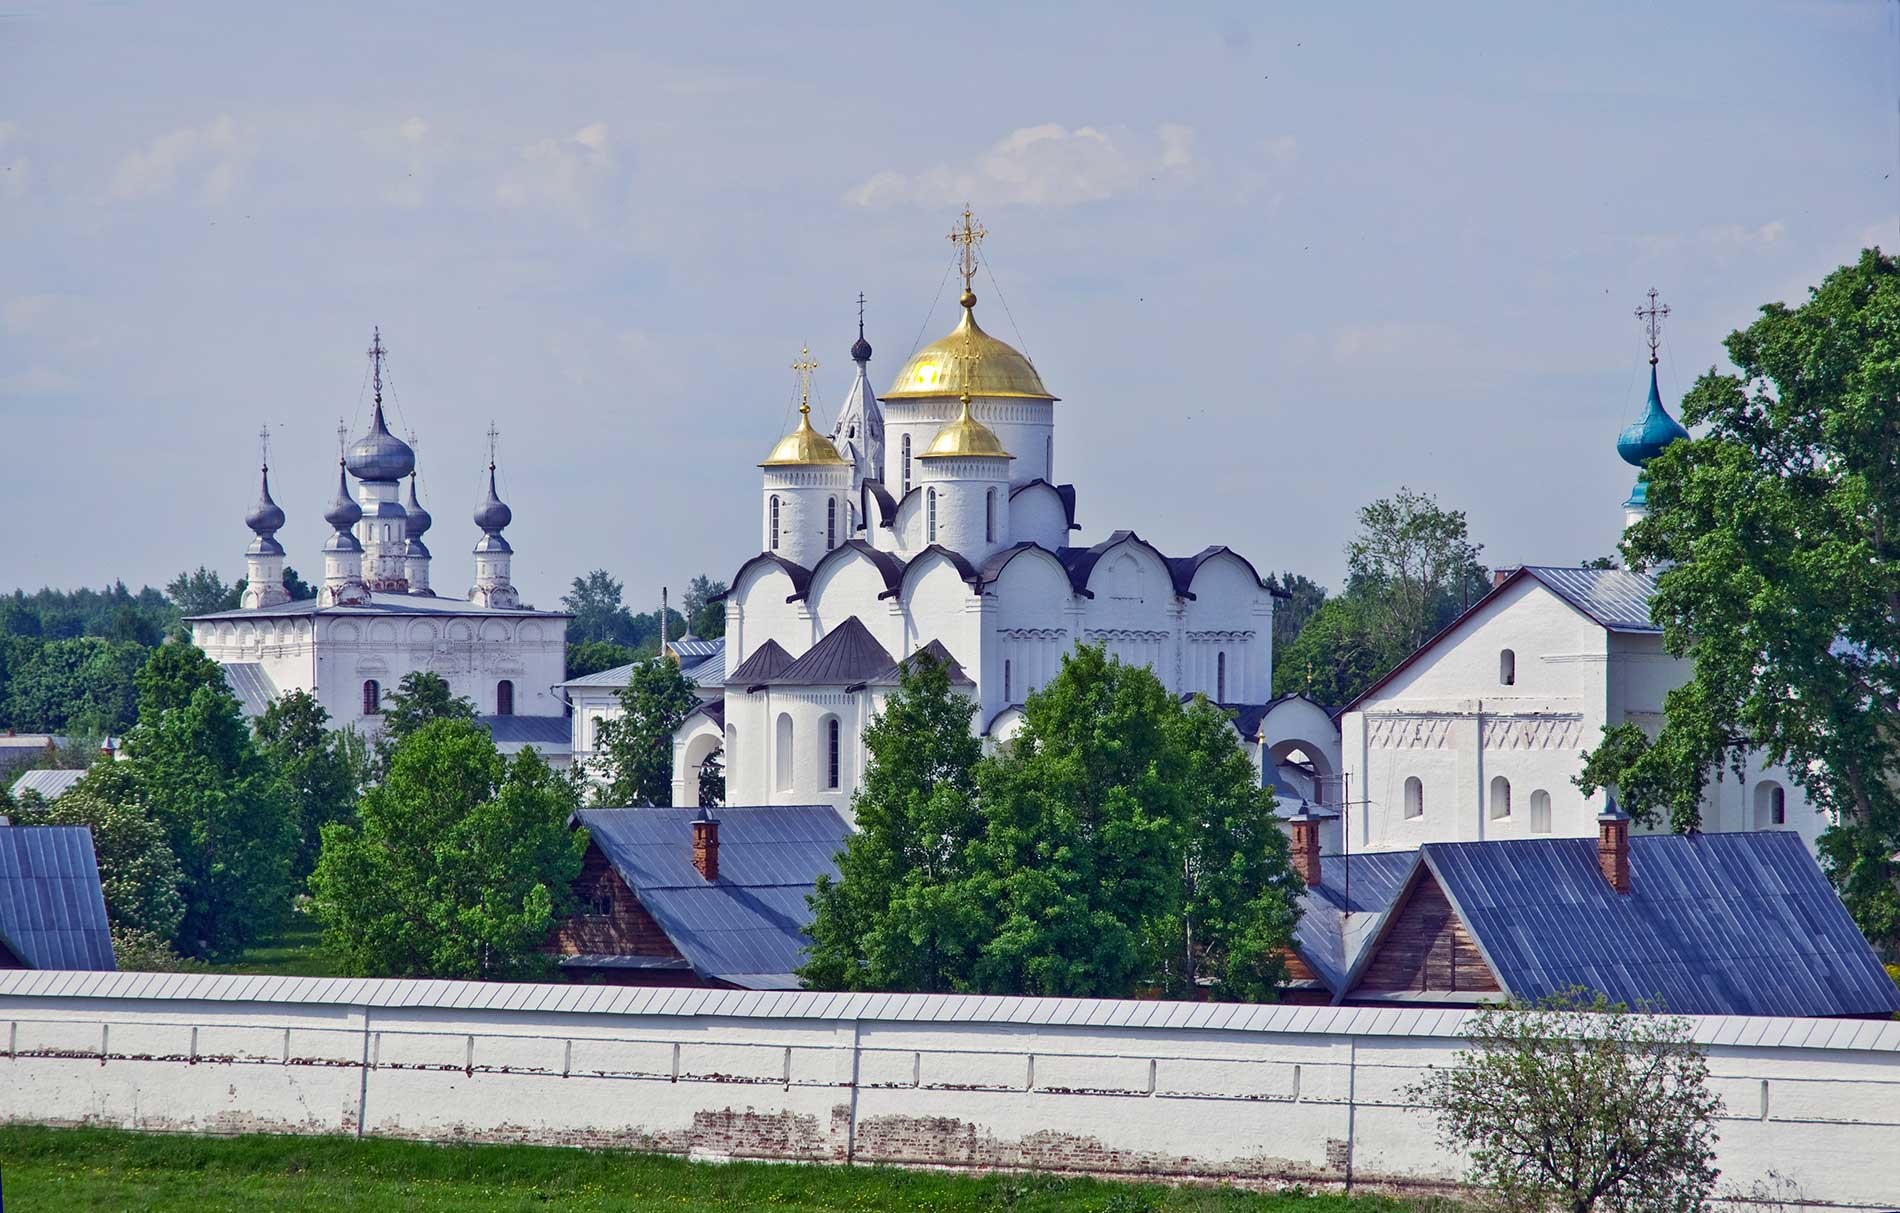 Intercession Convent, northeast view from Savior-Evfimy Monastery. From left: Church of Sts. Peter & Paul (beyond convent), ​Intercession Cathedral with three restored domes, refectory&Church of St. Anne. May 29, 2009.